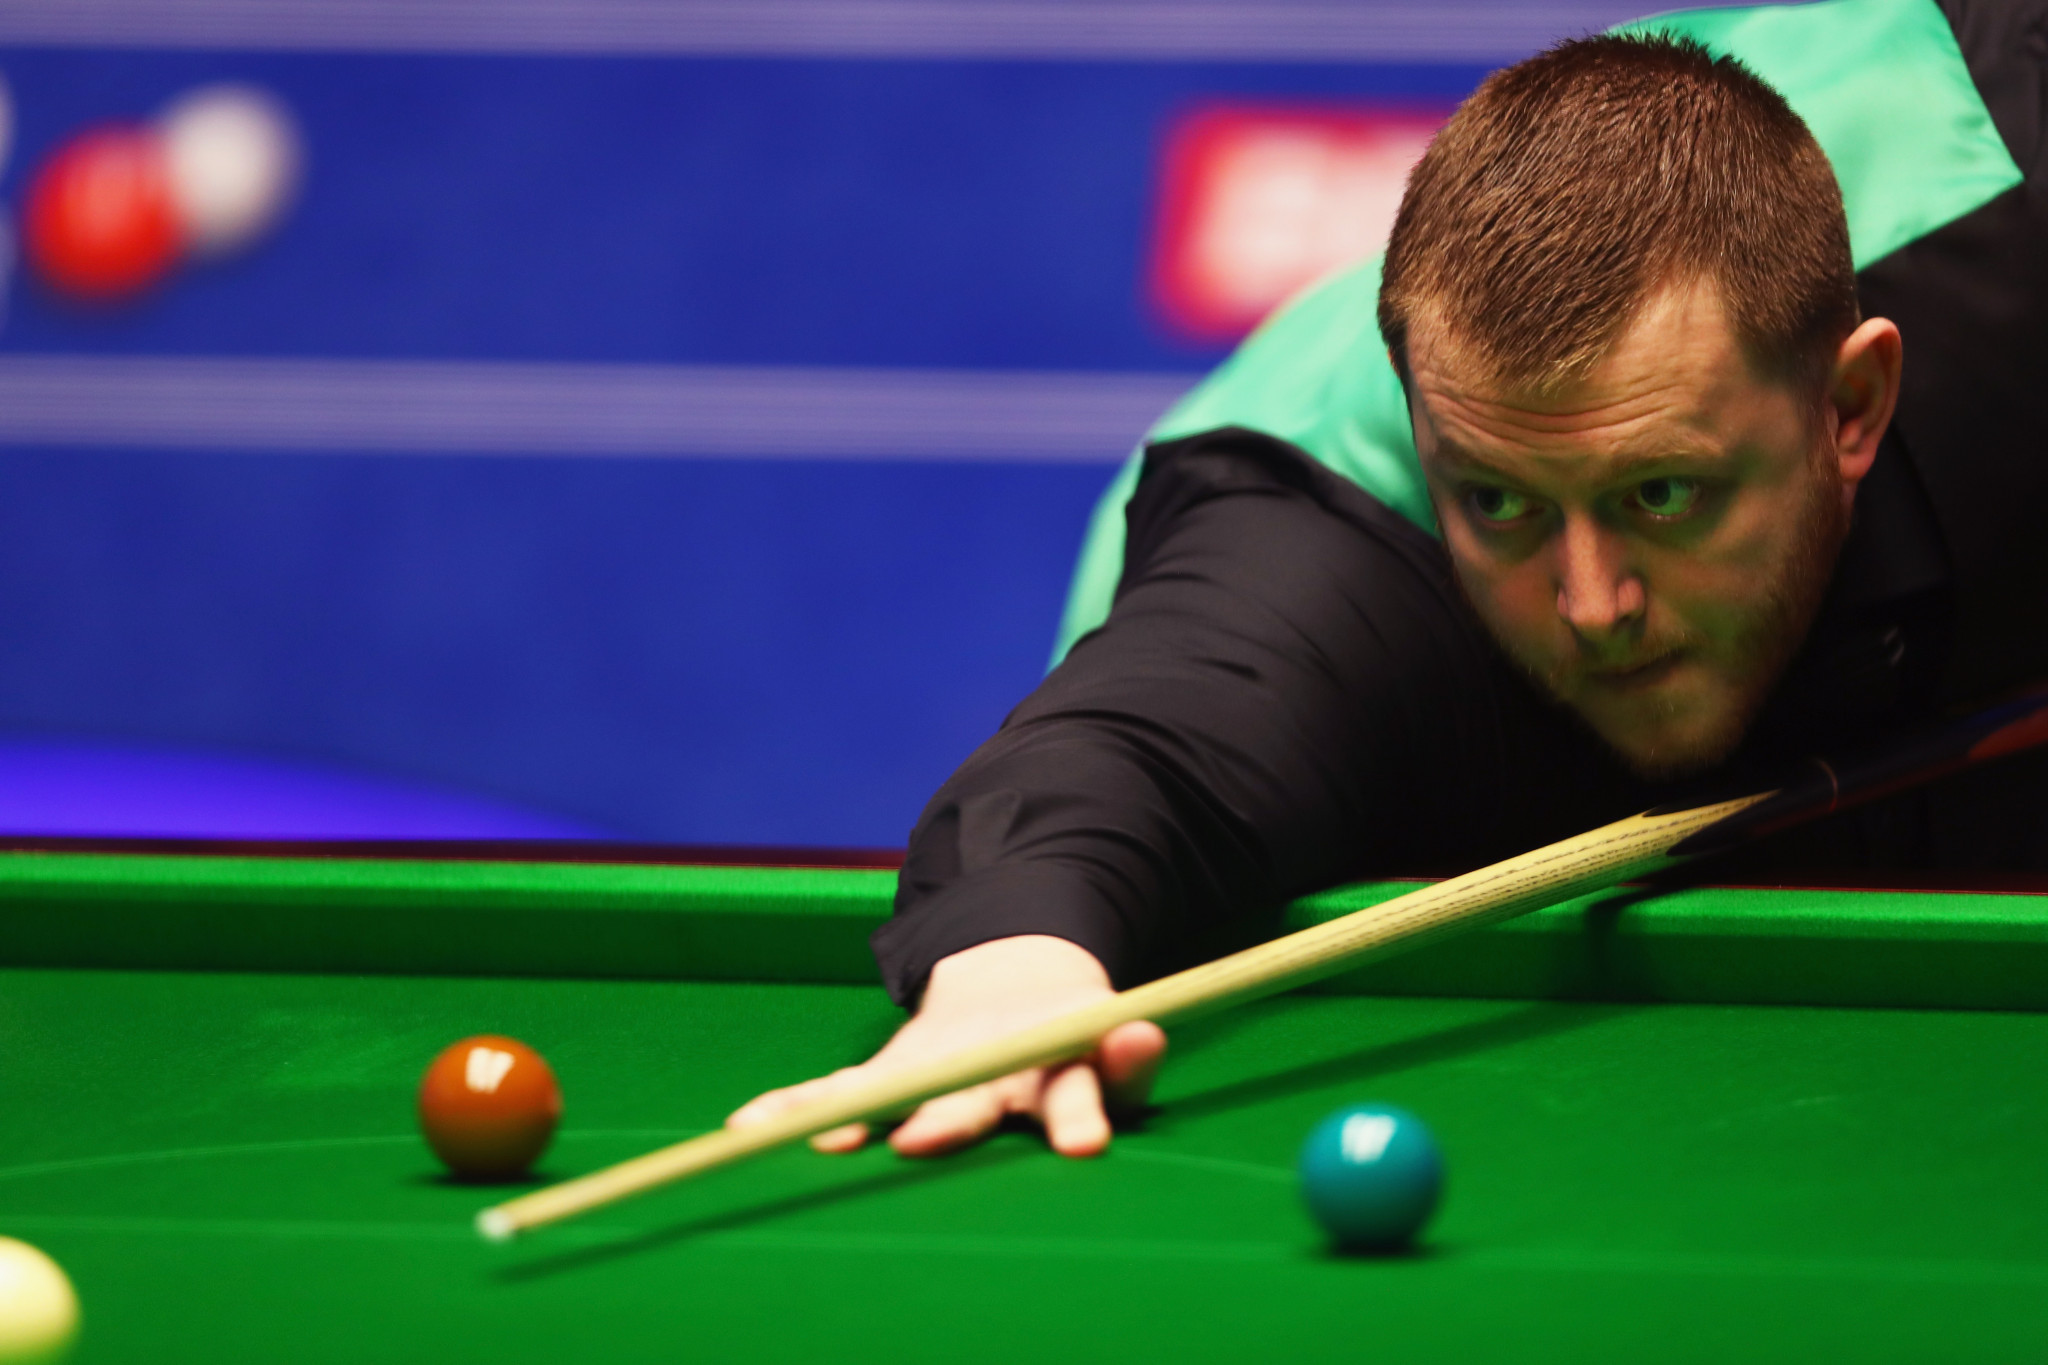 Northern Ireland's Mark Allen became the first player to reach the quarter-finals ©Getty Images